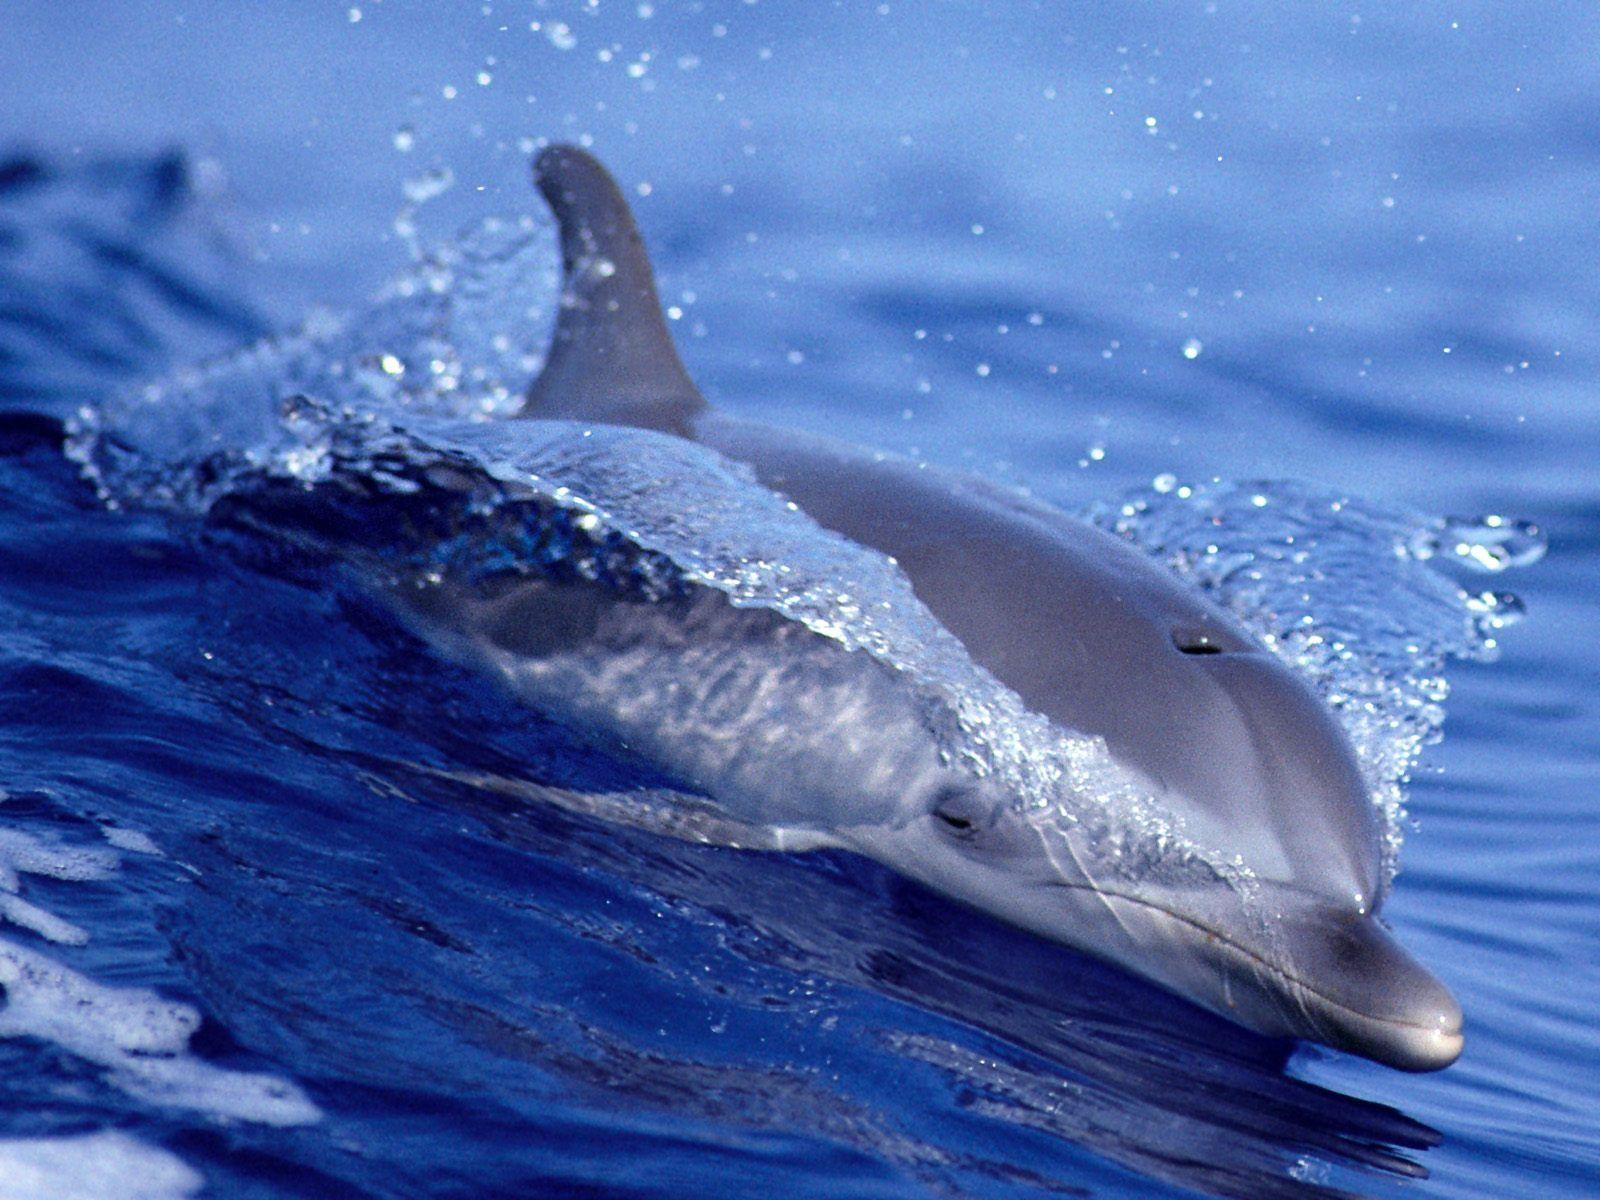 Dolphin Desktop Wallpaper. Spotted Dolphin Wallpaper. High Quality